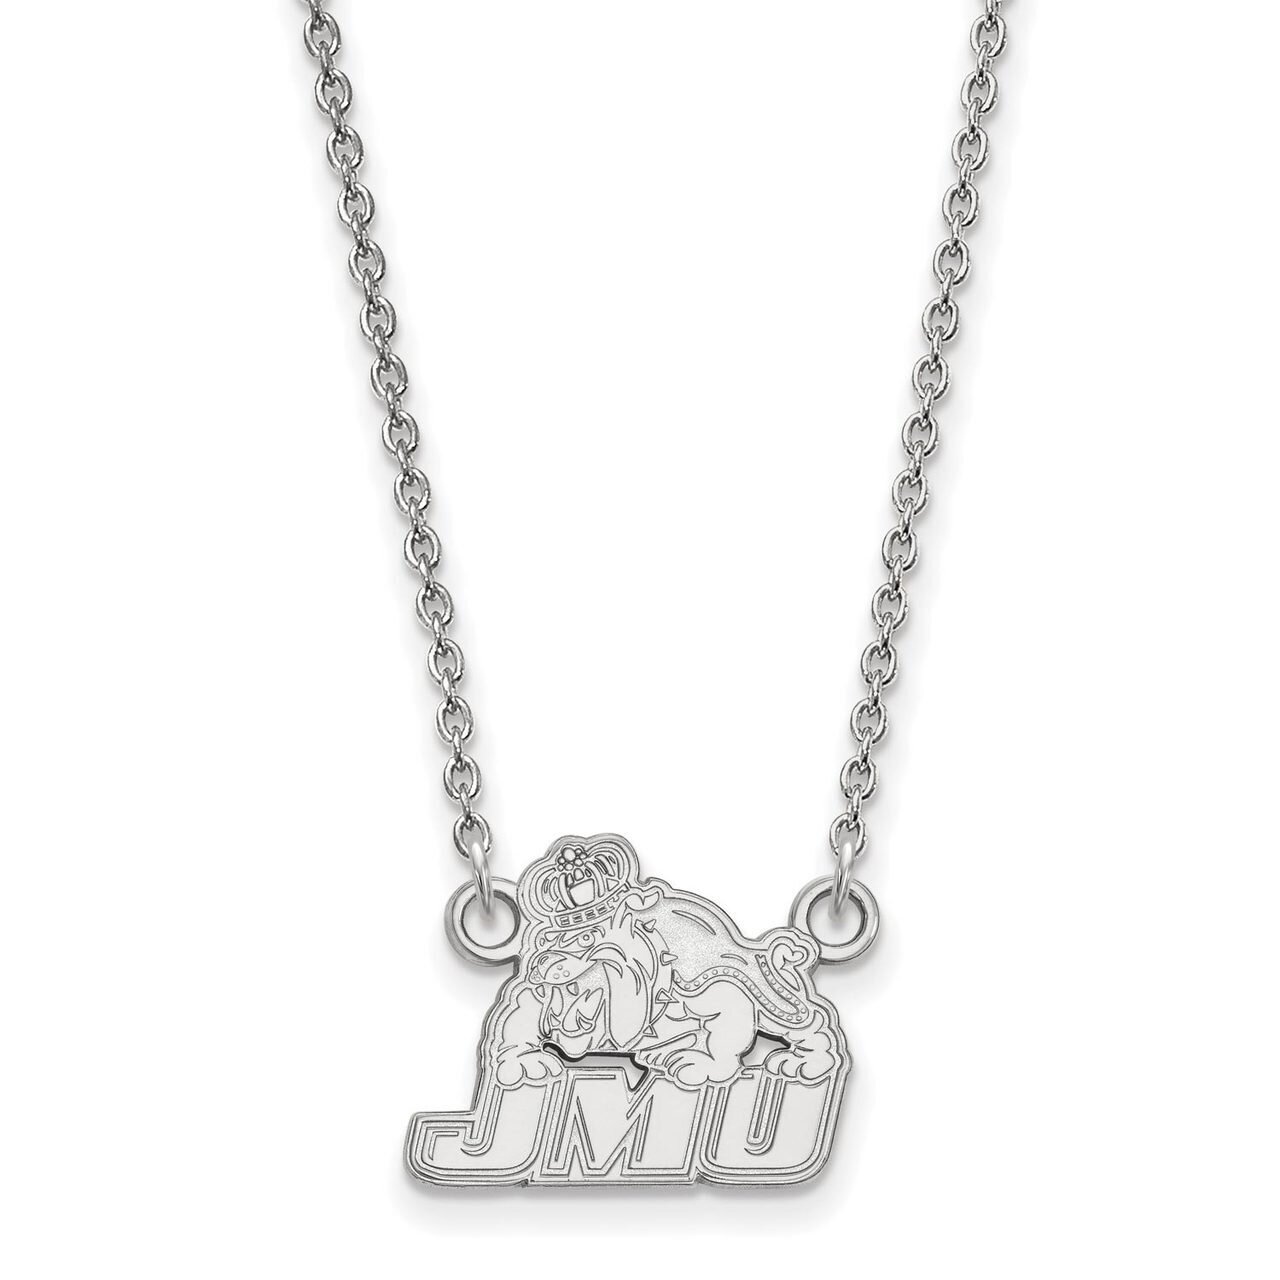 James Madison University Small Pendant with Chain Necklace 14k White Gold 4W005JMU-18